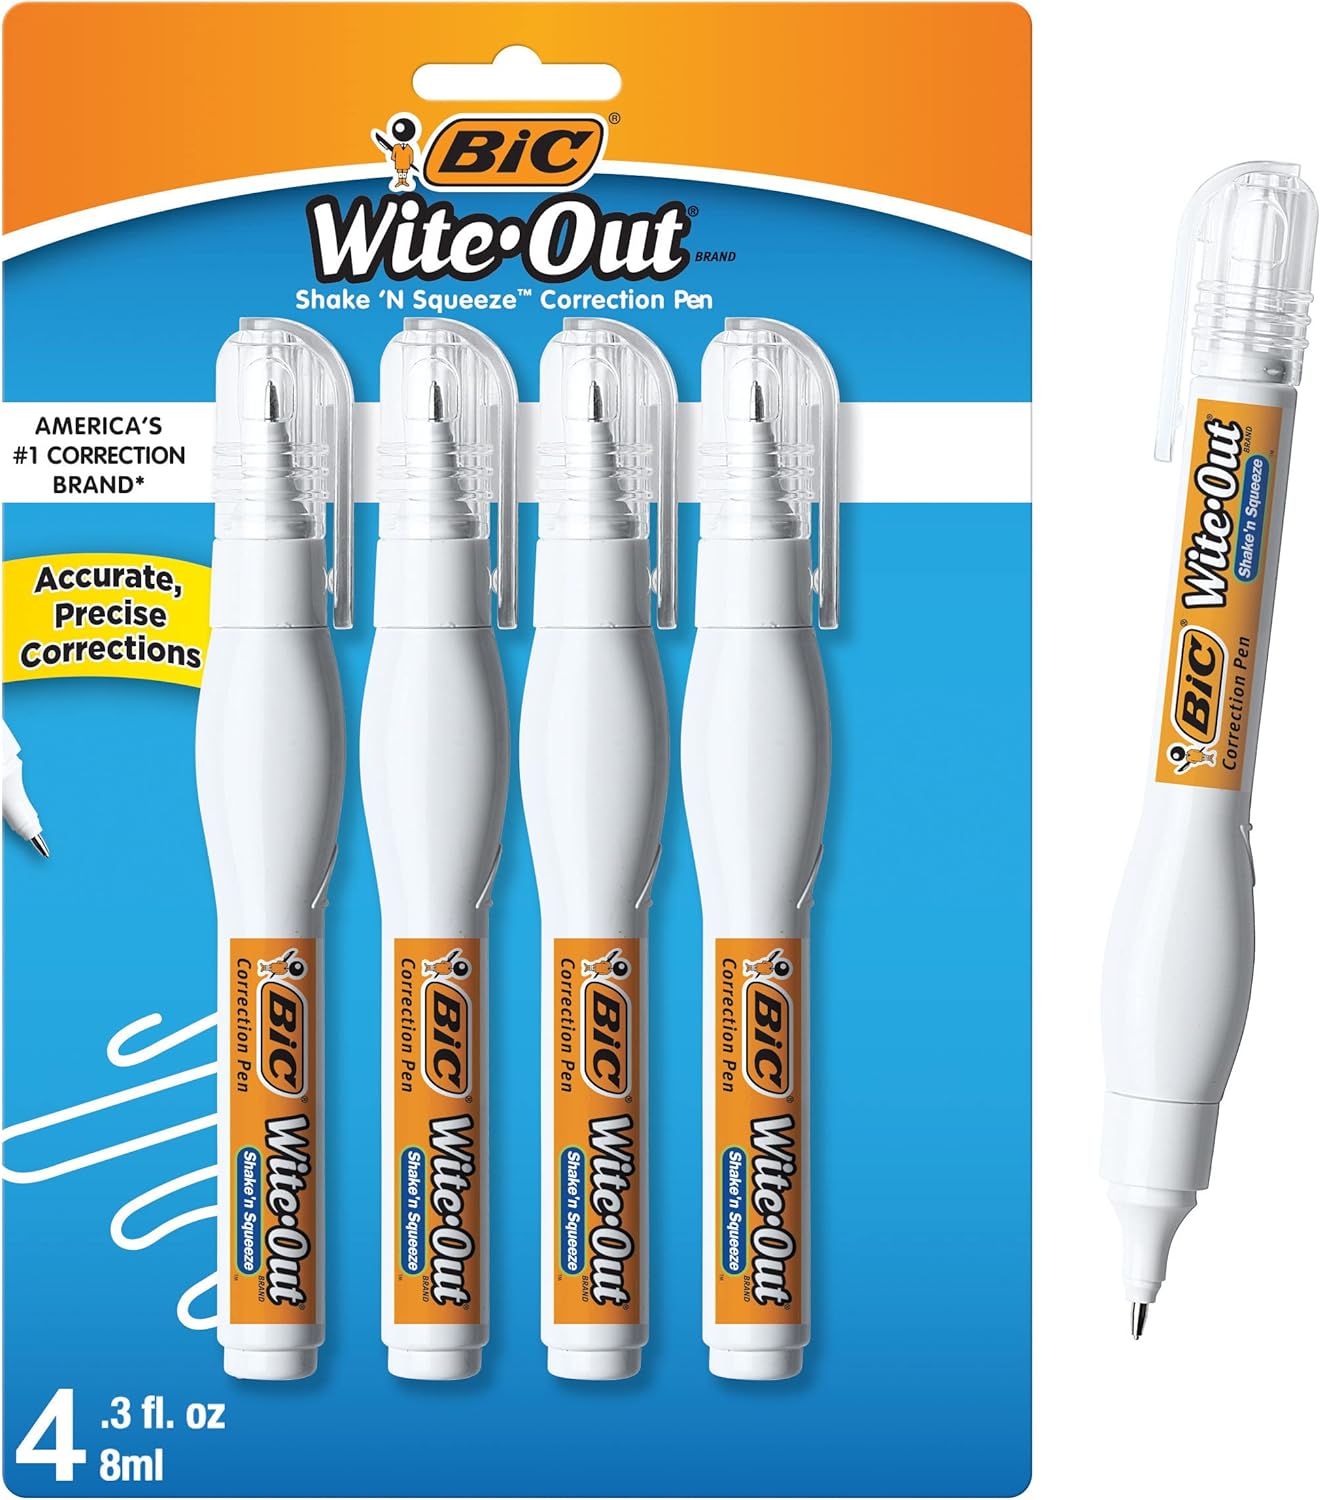 I recently purchased the BIC Wite-Out Brand Shake 'n Squeeze Correction Pen, and I am extremely happy with my purchase. The correction pens are perfect for those who want to fix mistakes quickly and easily without having to wait for the correction fluid to dry.The Shake 'n Squeeze design makes the pens easy to use - simply shake the pen and squeeze the fluid onto the area you need to correct. The fluid comes out smoothly and consistently, without any mess or fuss. Plus, the fluid dries quickly, 